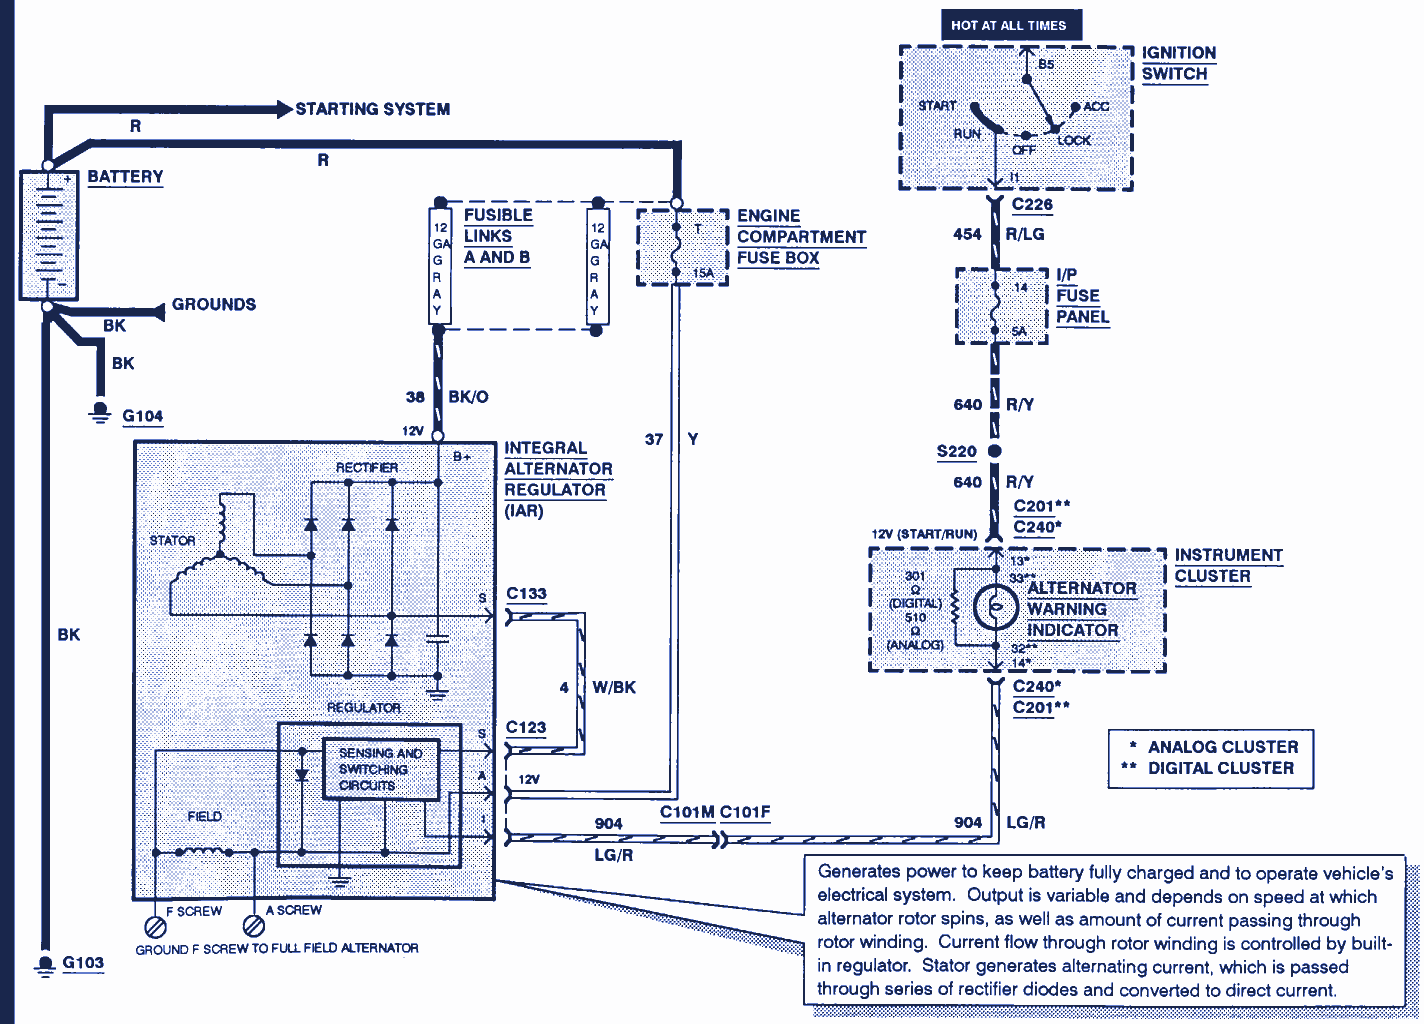 Ford Expedition Wiring Diagram from 3.bp.blogspot.com